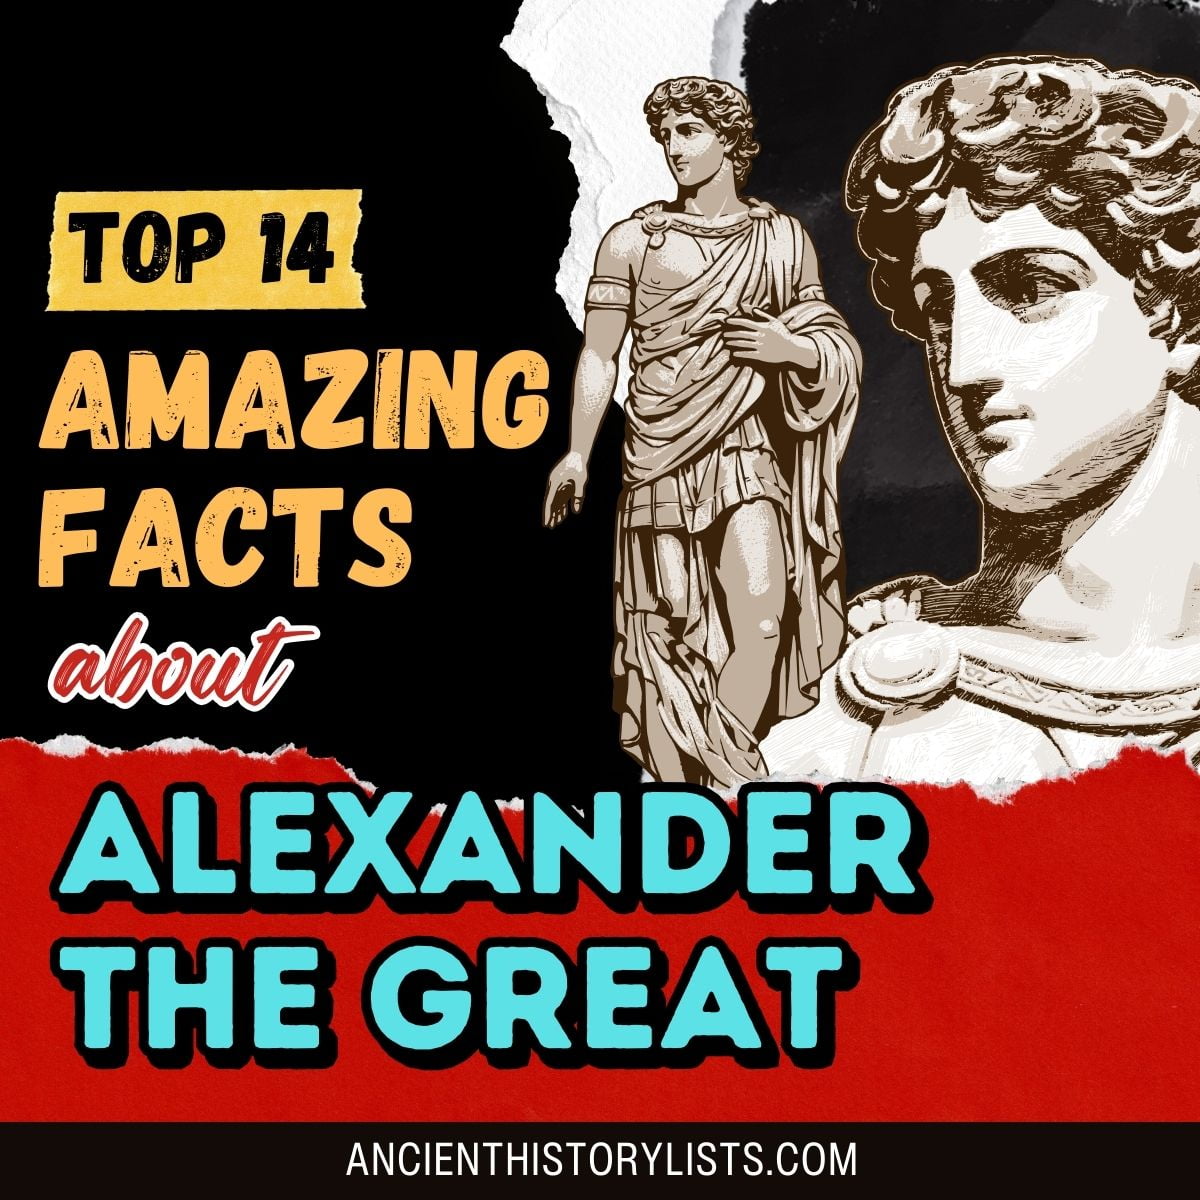 Facts about Alexander the Great